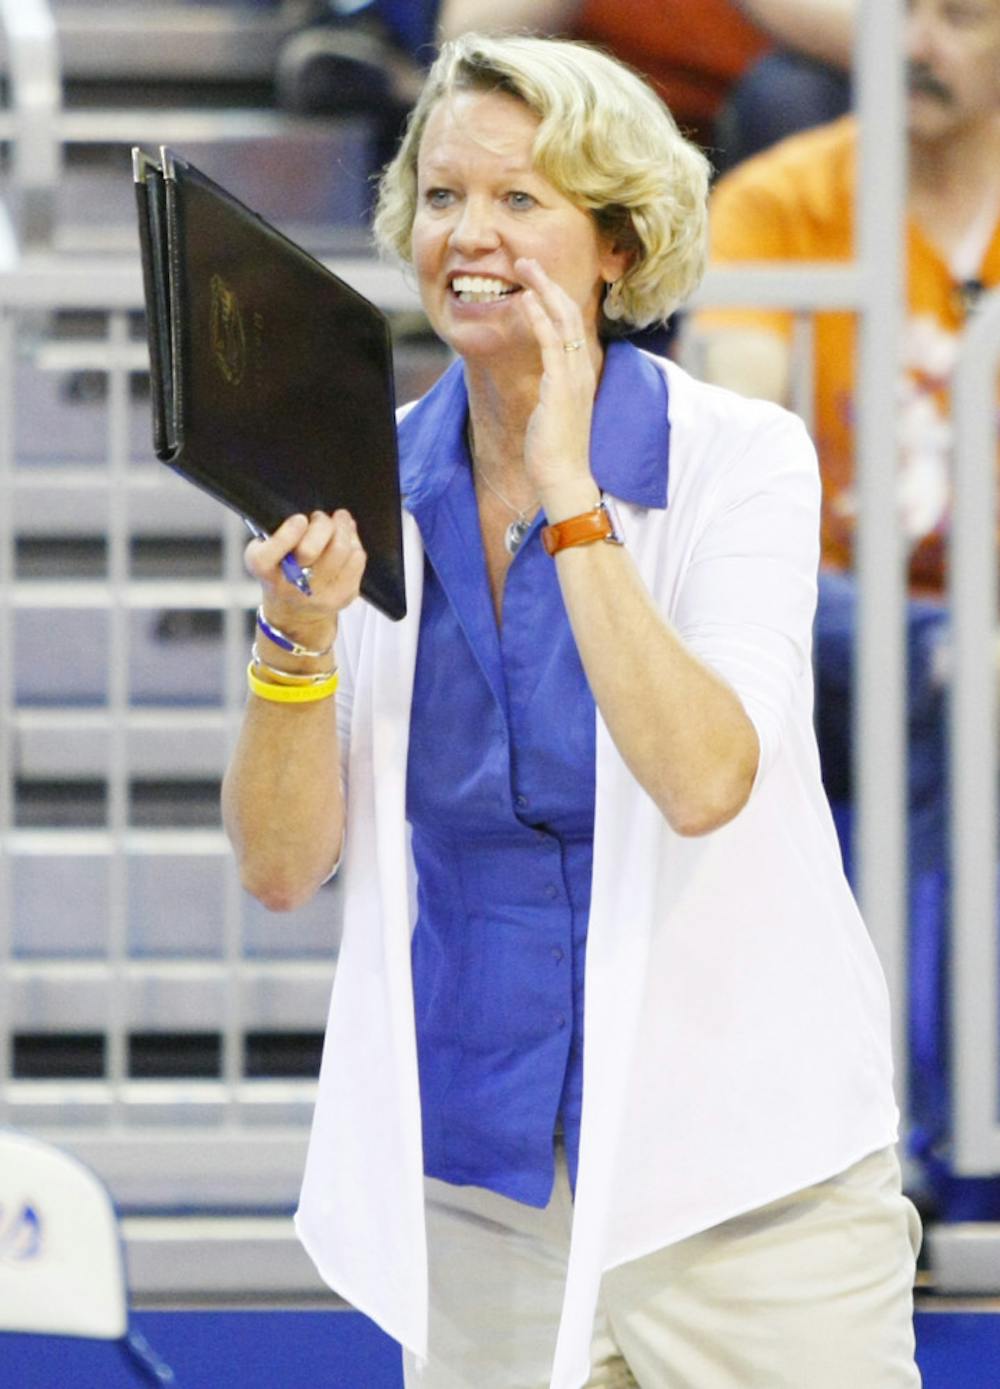 <p>Florida coach Mary Wise claps during a 3-0 win against FIU on Aug. 24, 2012 in the O'Connell Center.</p>